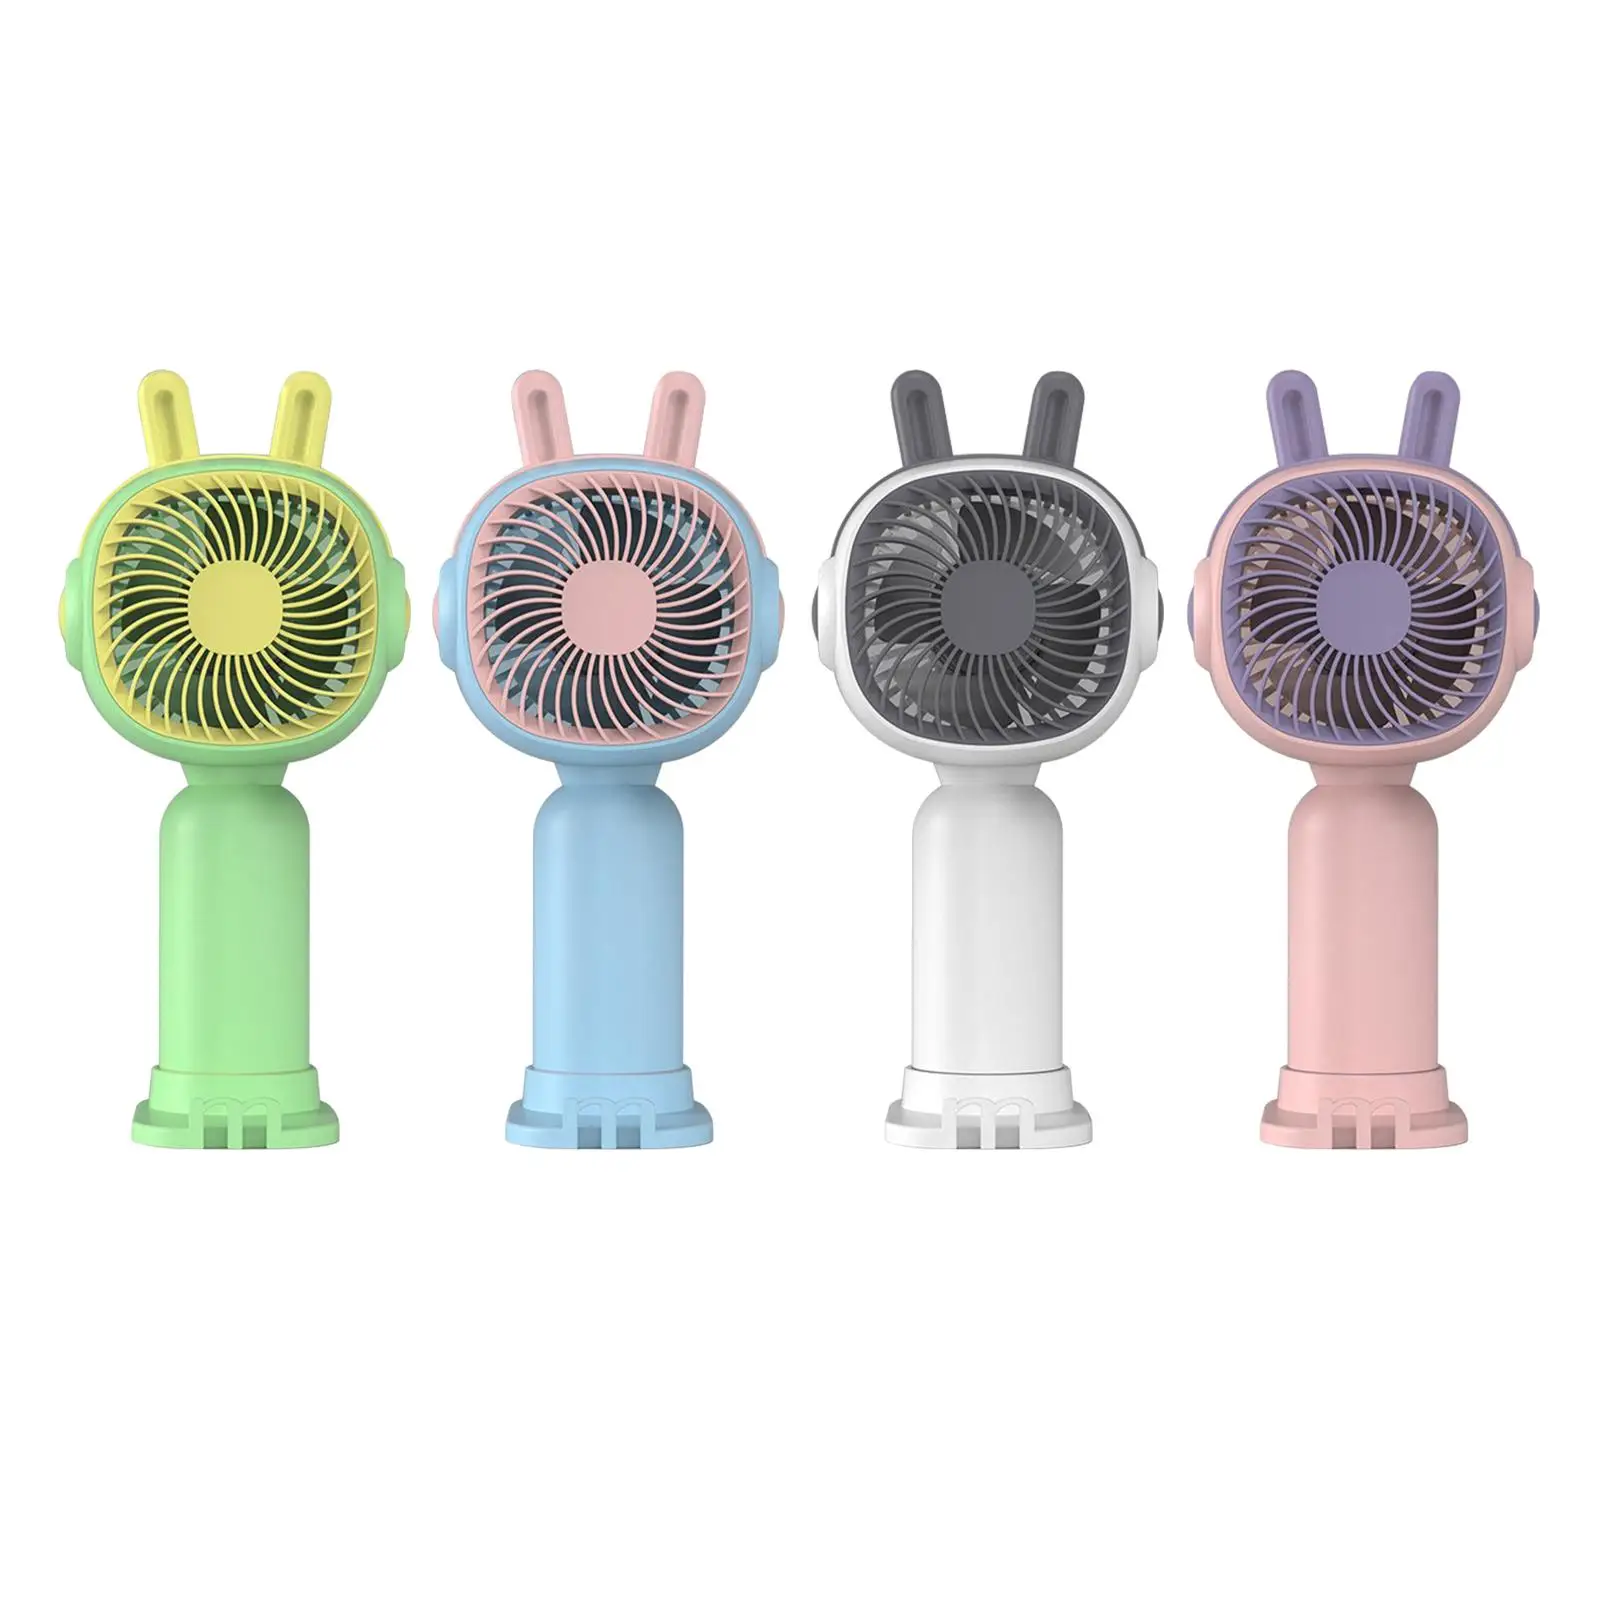 Personal Fan with Phone Stand Base Refreshing Wind Small Handheld Small Desk Fan for Dormitory Hiking Indoor Outdoor Desktop